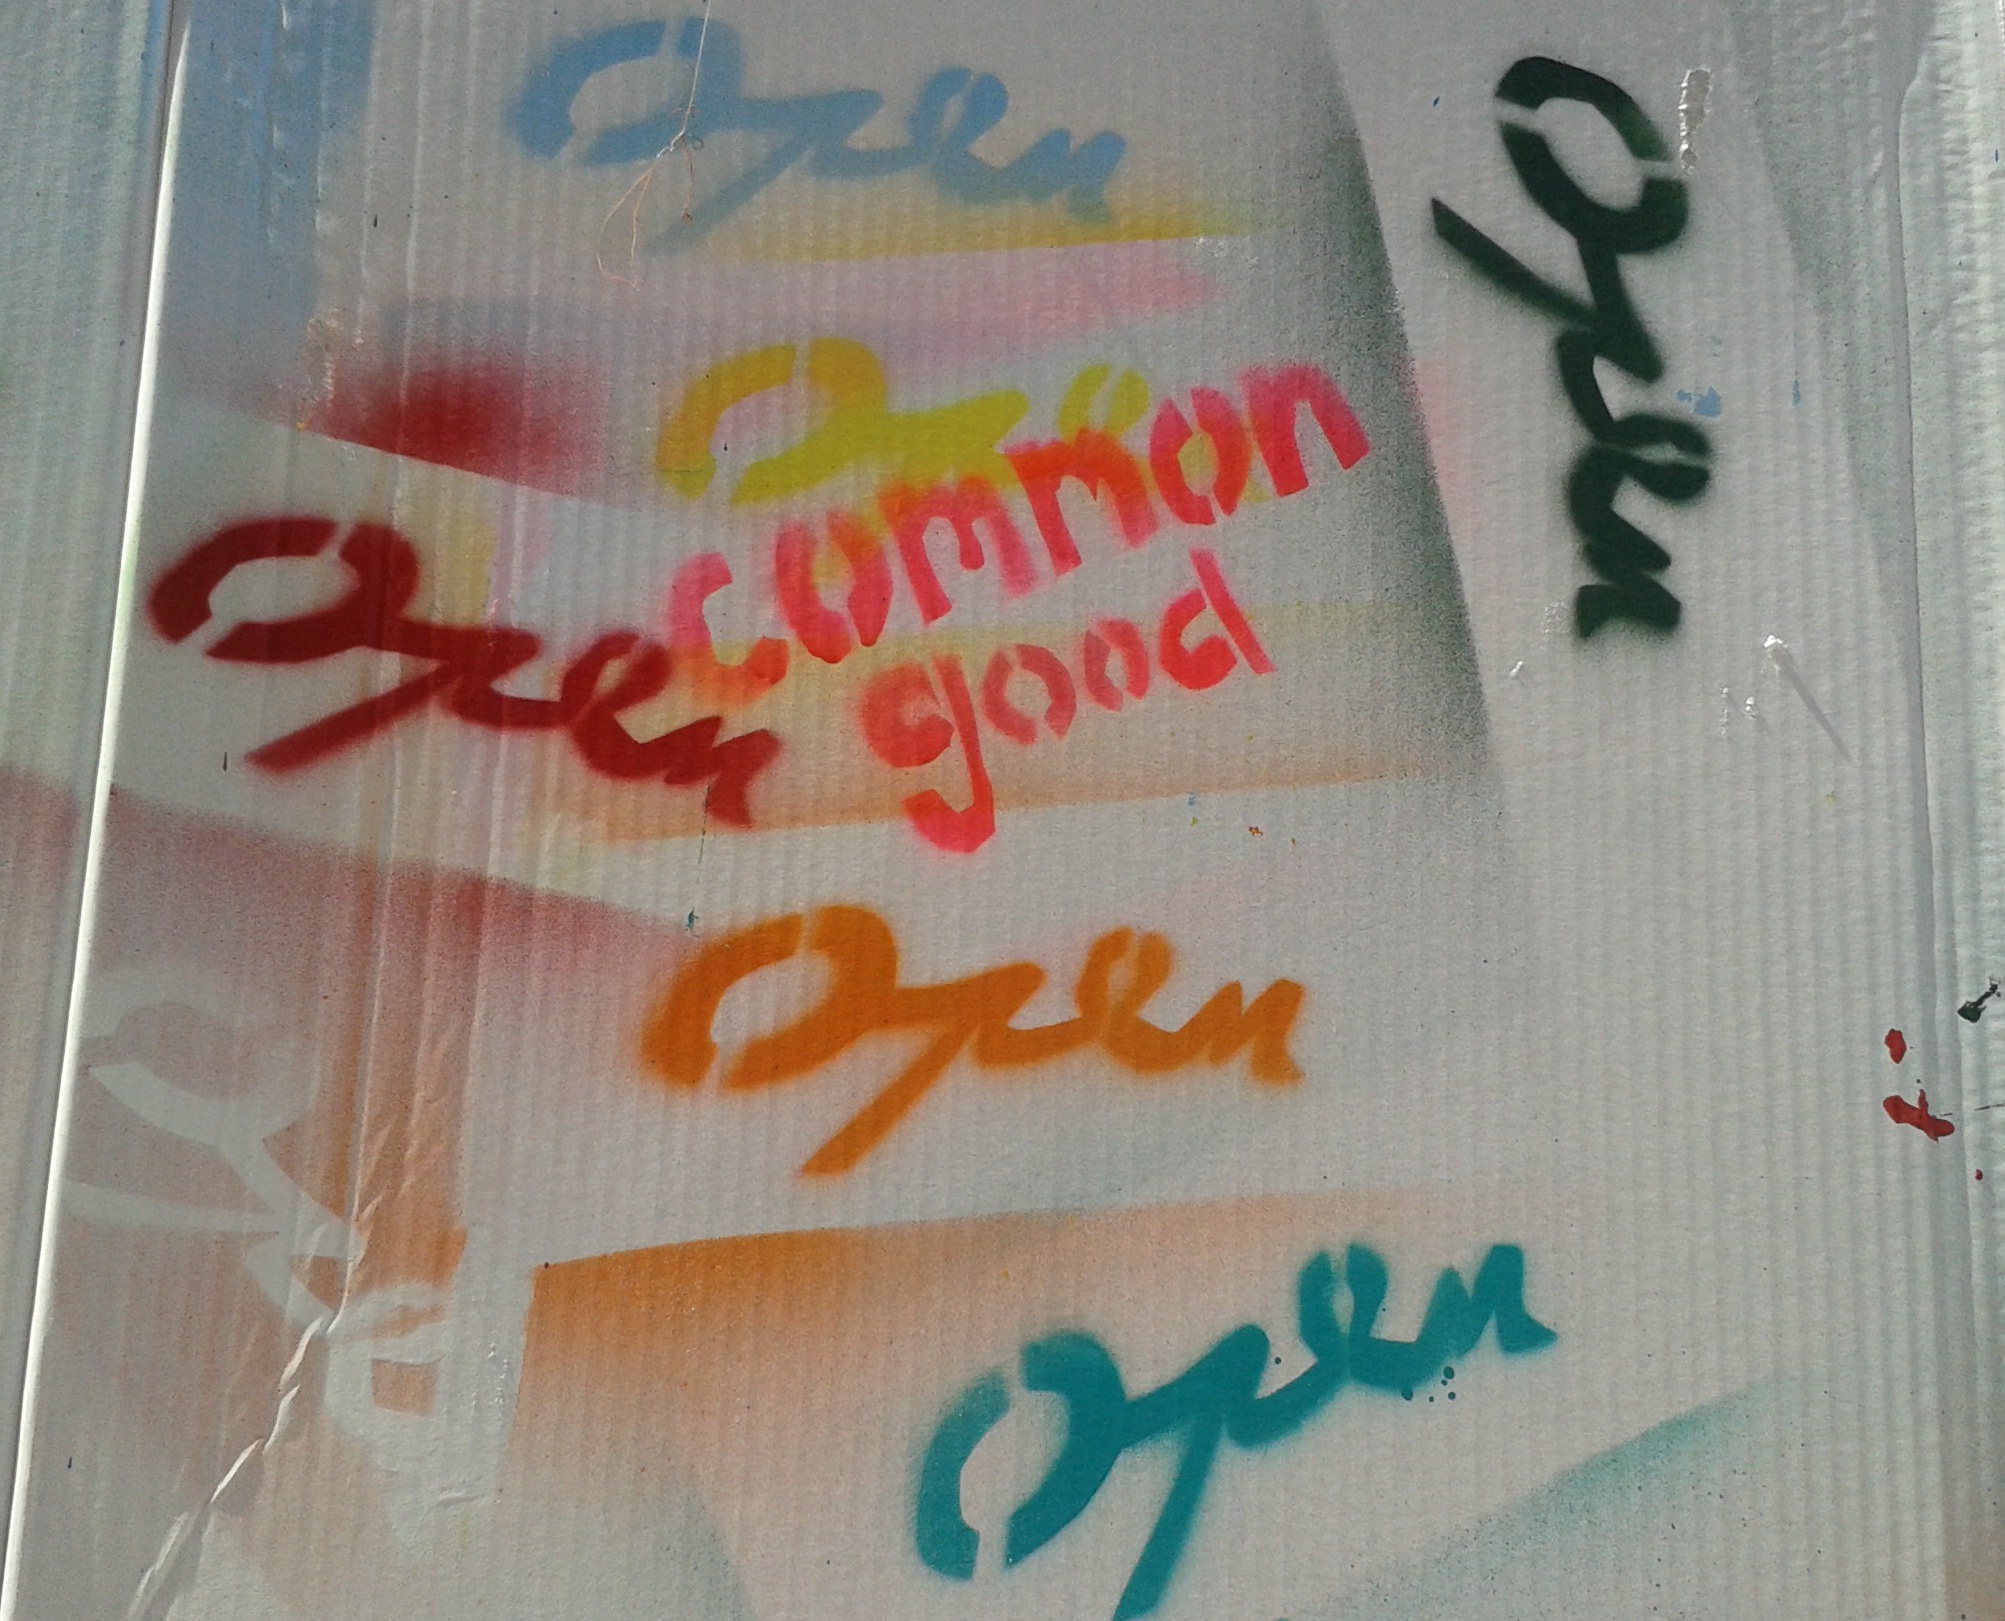 Graffiti with words "open" in different colours and "common good" in orange